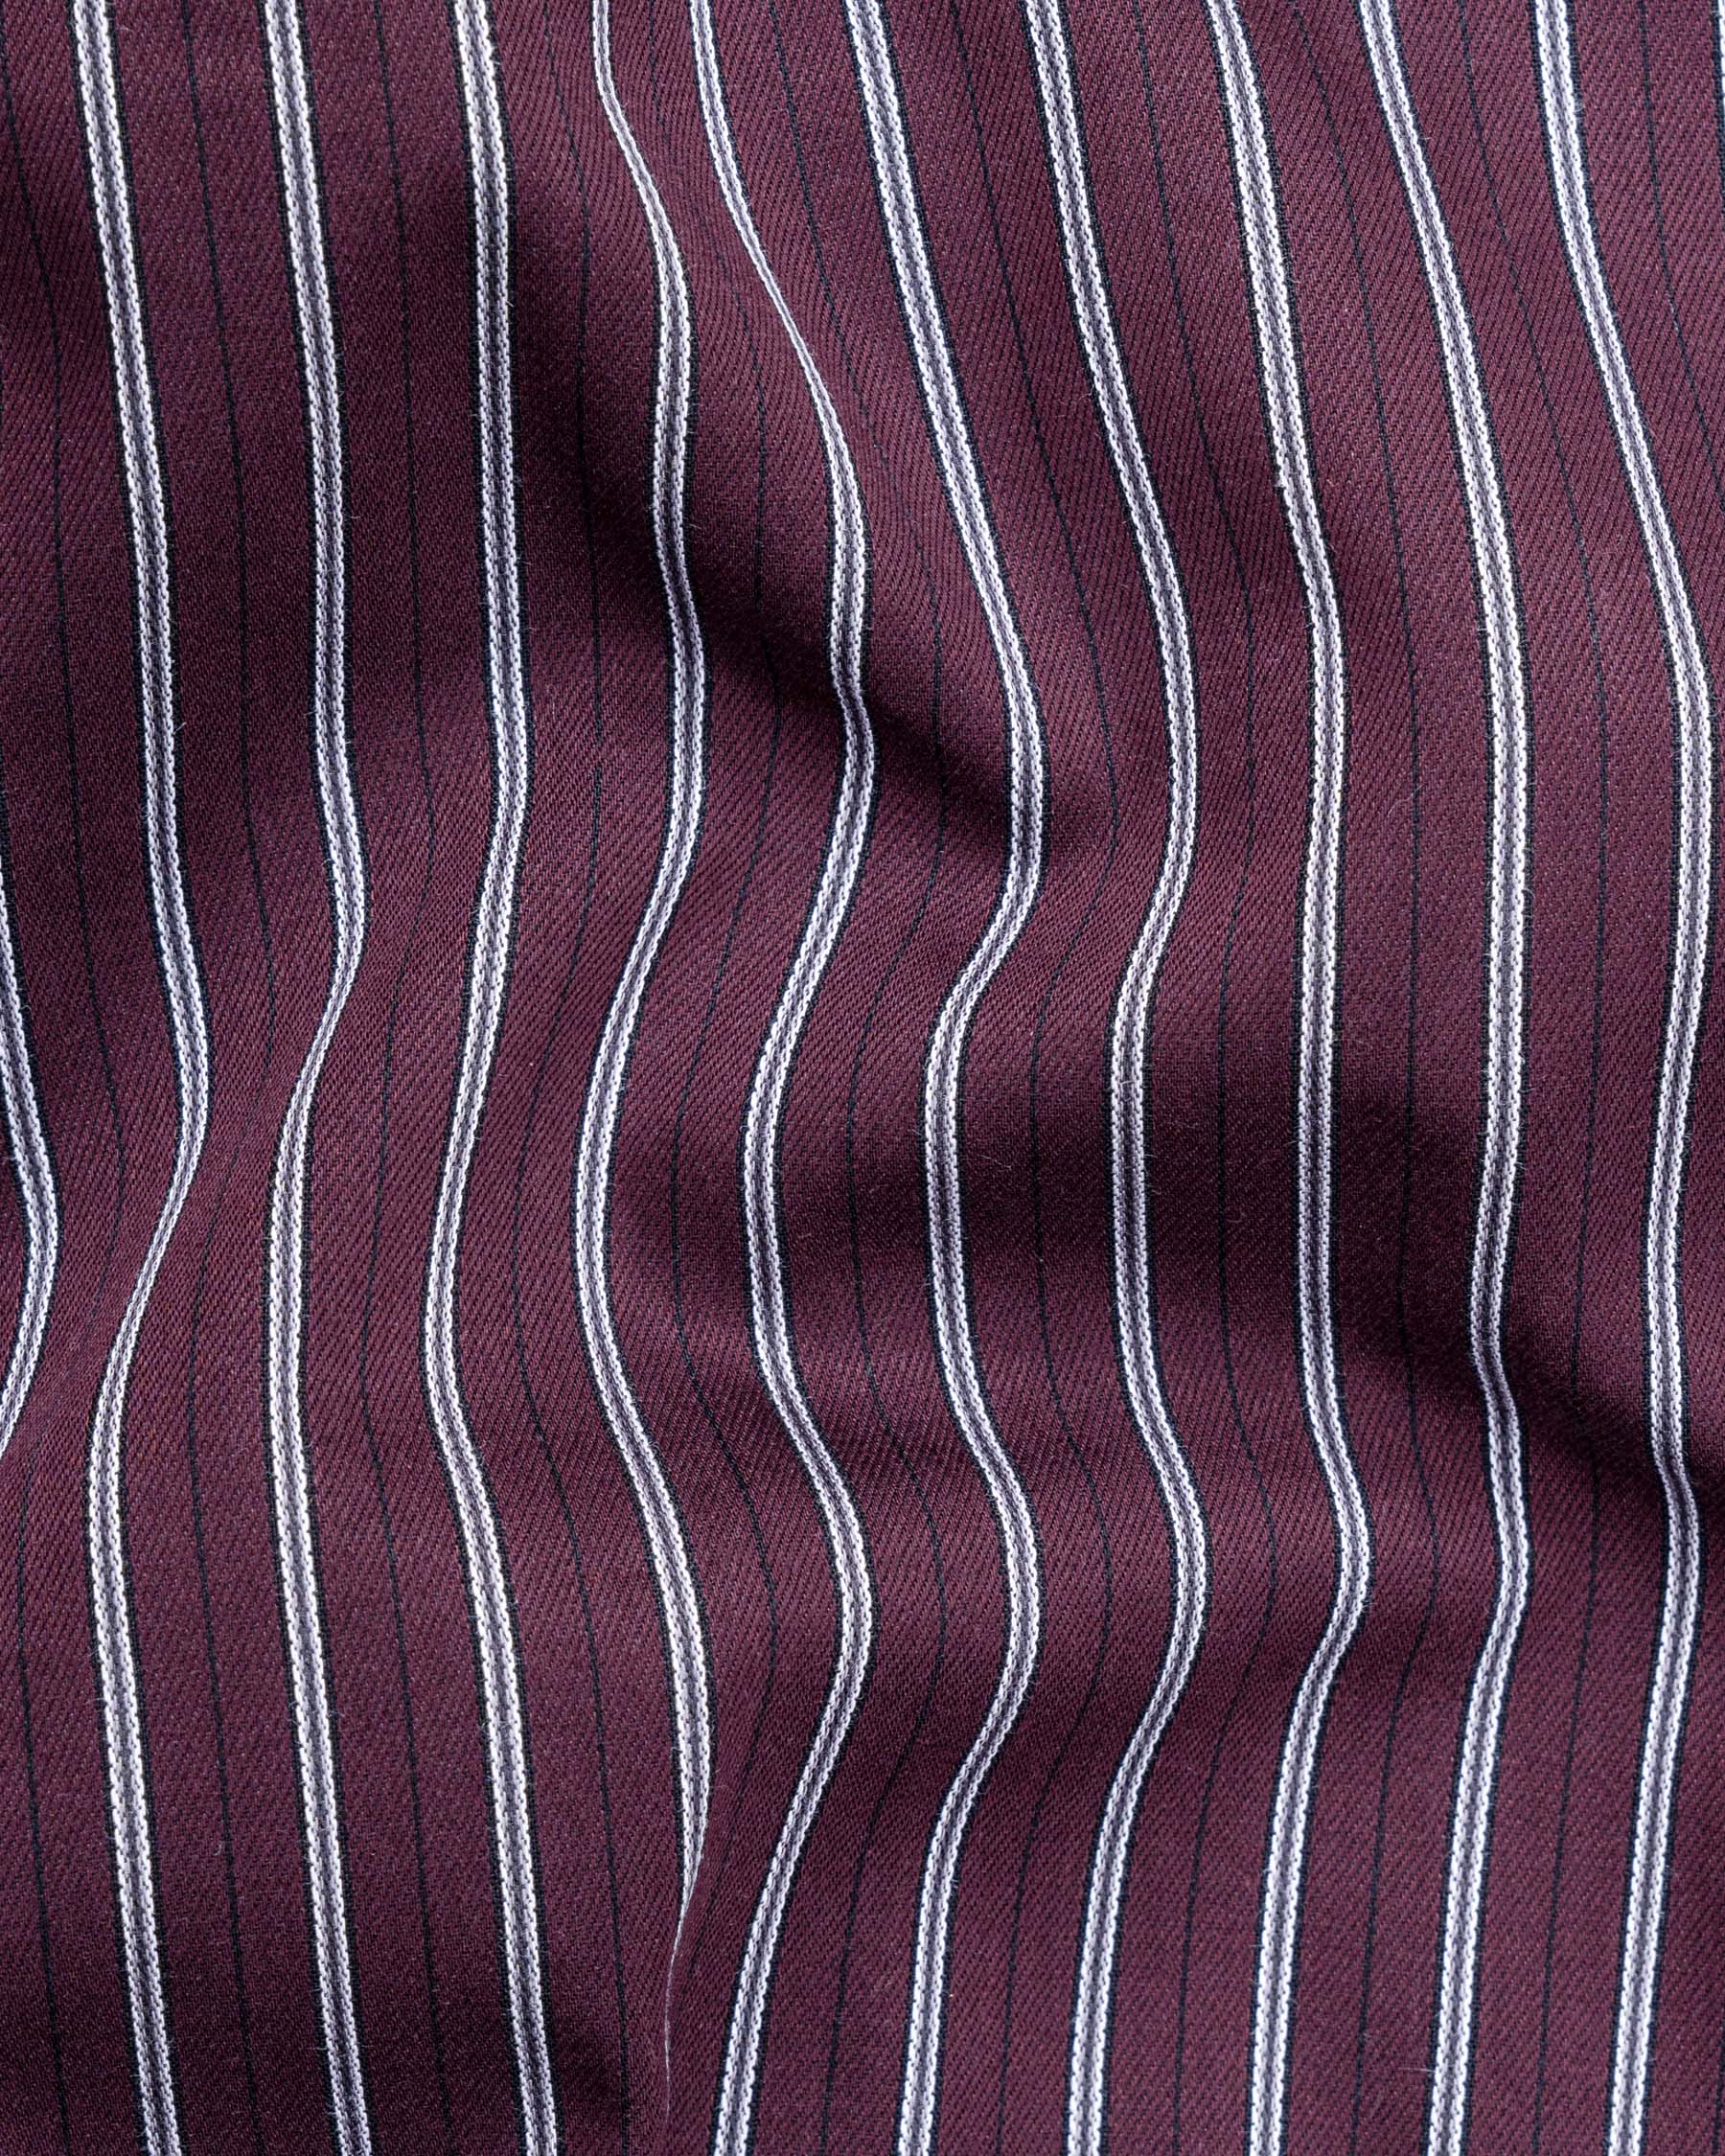 Bistre with Black and white Striped Twill Textured Premium Cotton Shirt 6886-38, 6886-H-38, 6886-39, 6886-H-39, 6886-40, 6886-H-40, 6886-42, 6886-H-42, 6886-44, 6886-H-44, 6886-46, 6886-H-46, 6886-48, 6886-H-48, 6886-50, 6886-H-50, 6886-52, 6886-H-52